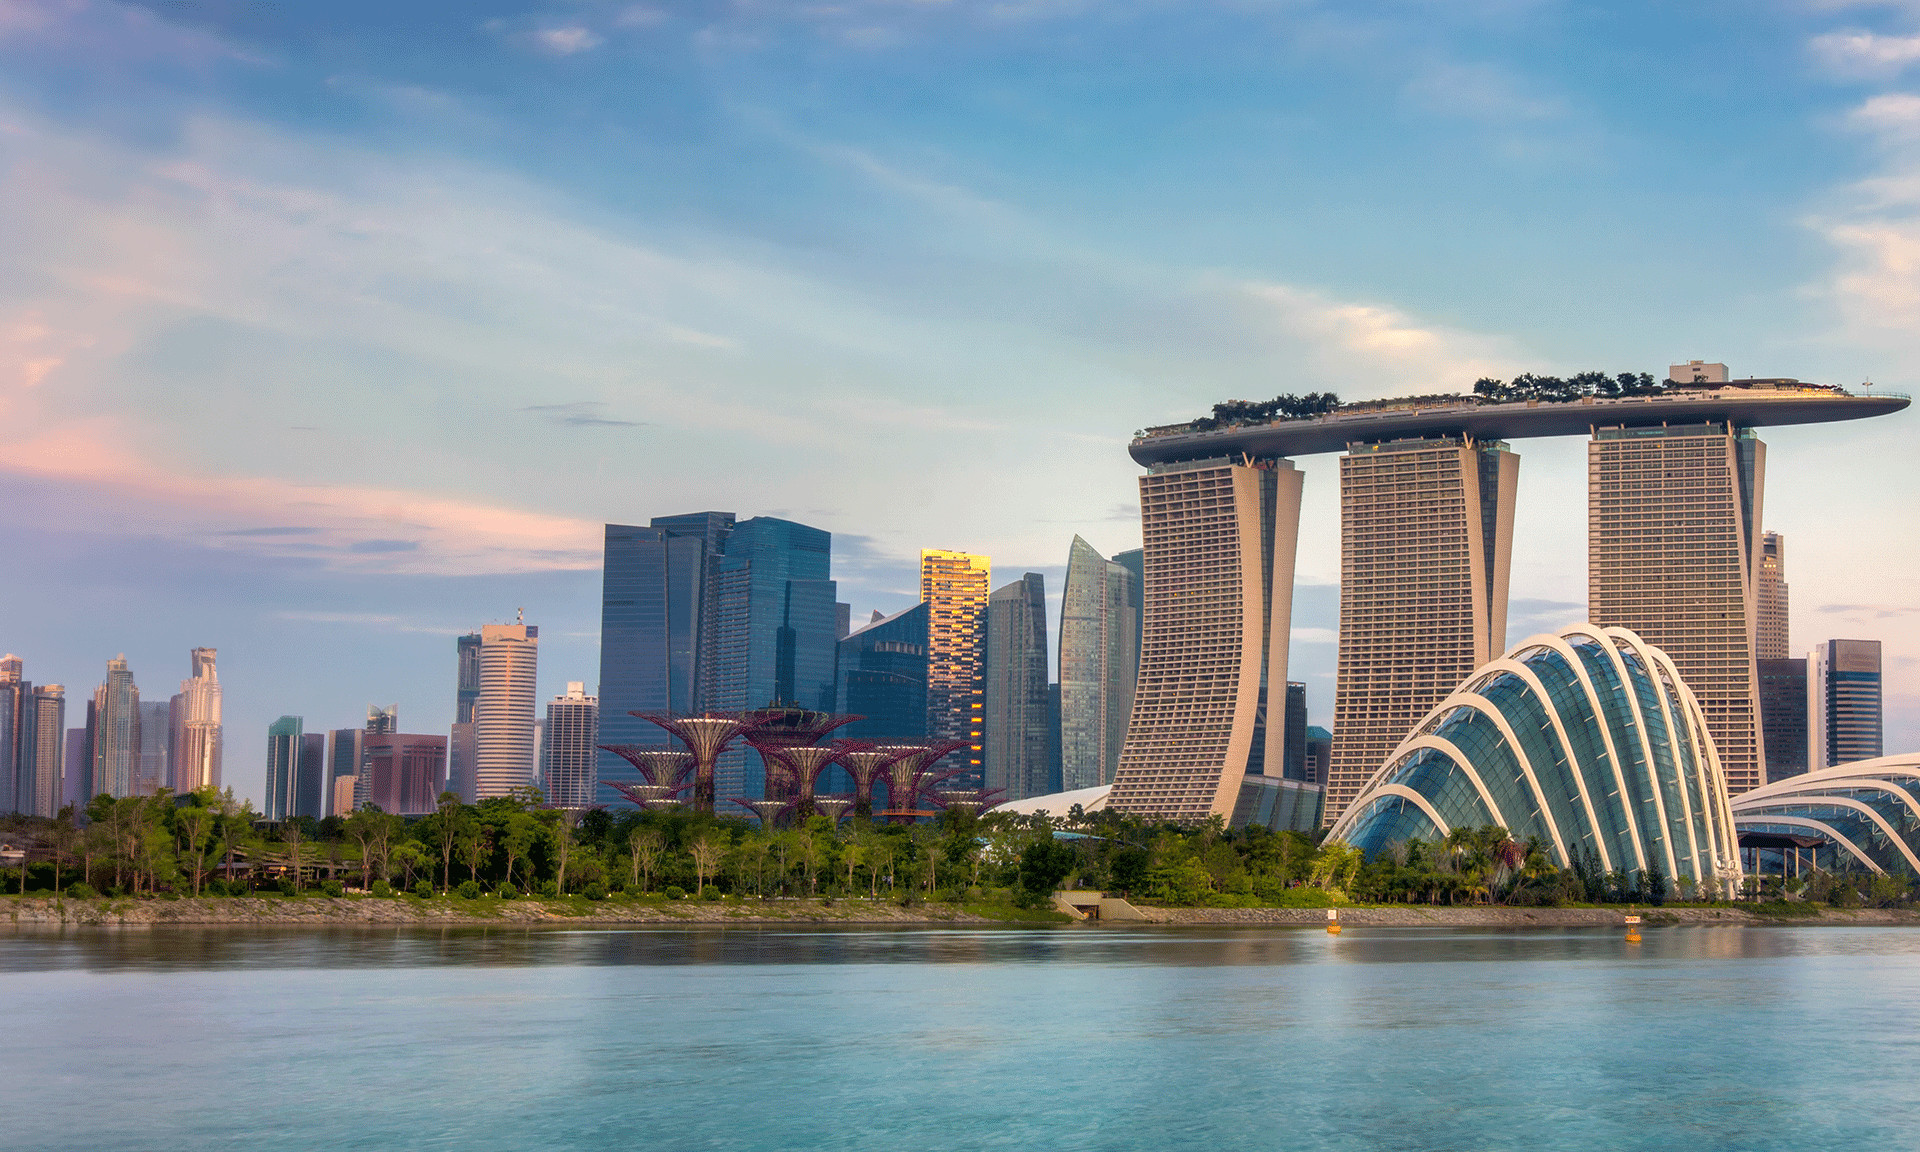 Guide on Singapore Companies Expanding in Global Markets